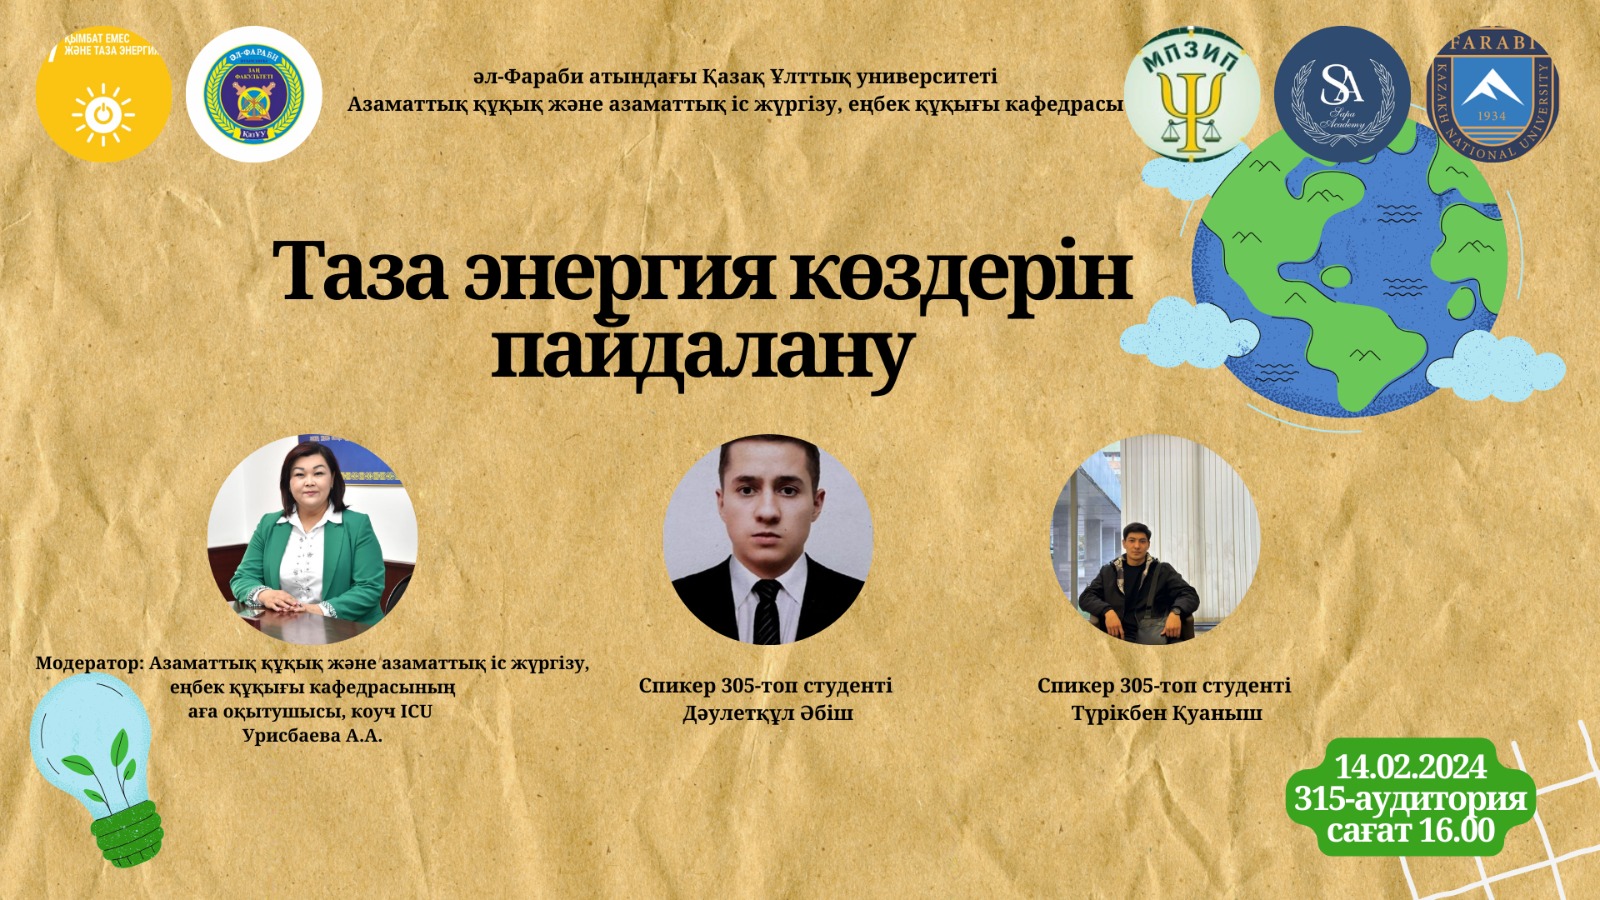 On February 14, 2024 the Department of Civil Law and Civil Procedure, Labor Law held a meeting dedicated to the 90th anniversary of Al-Farabi Kazakh National University on the topic "Using clean energy sources" within the framework of the UN SDG №7 program "Inexpensive and clean energy".